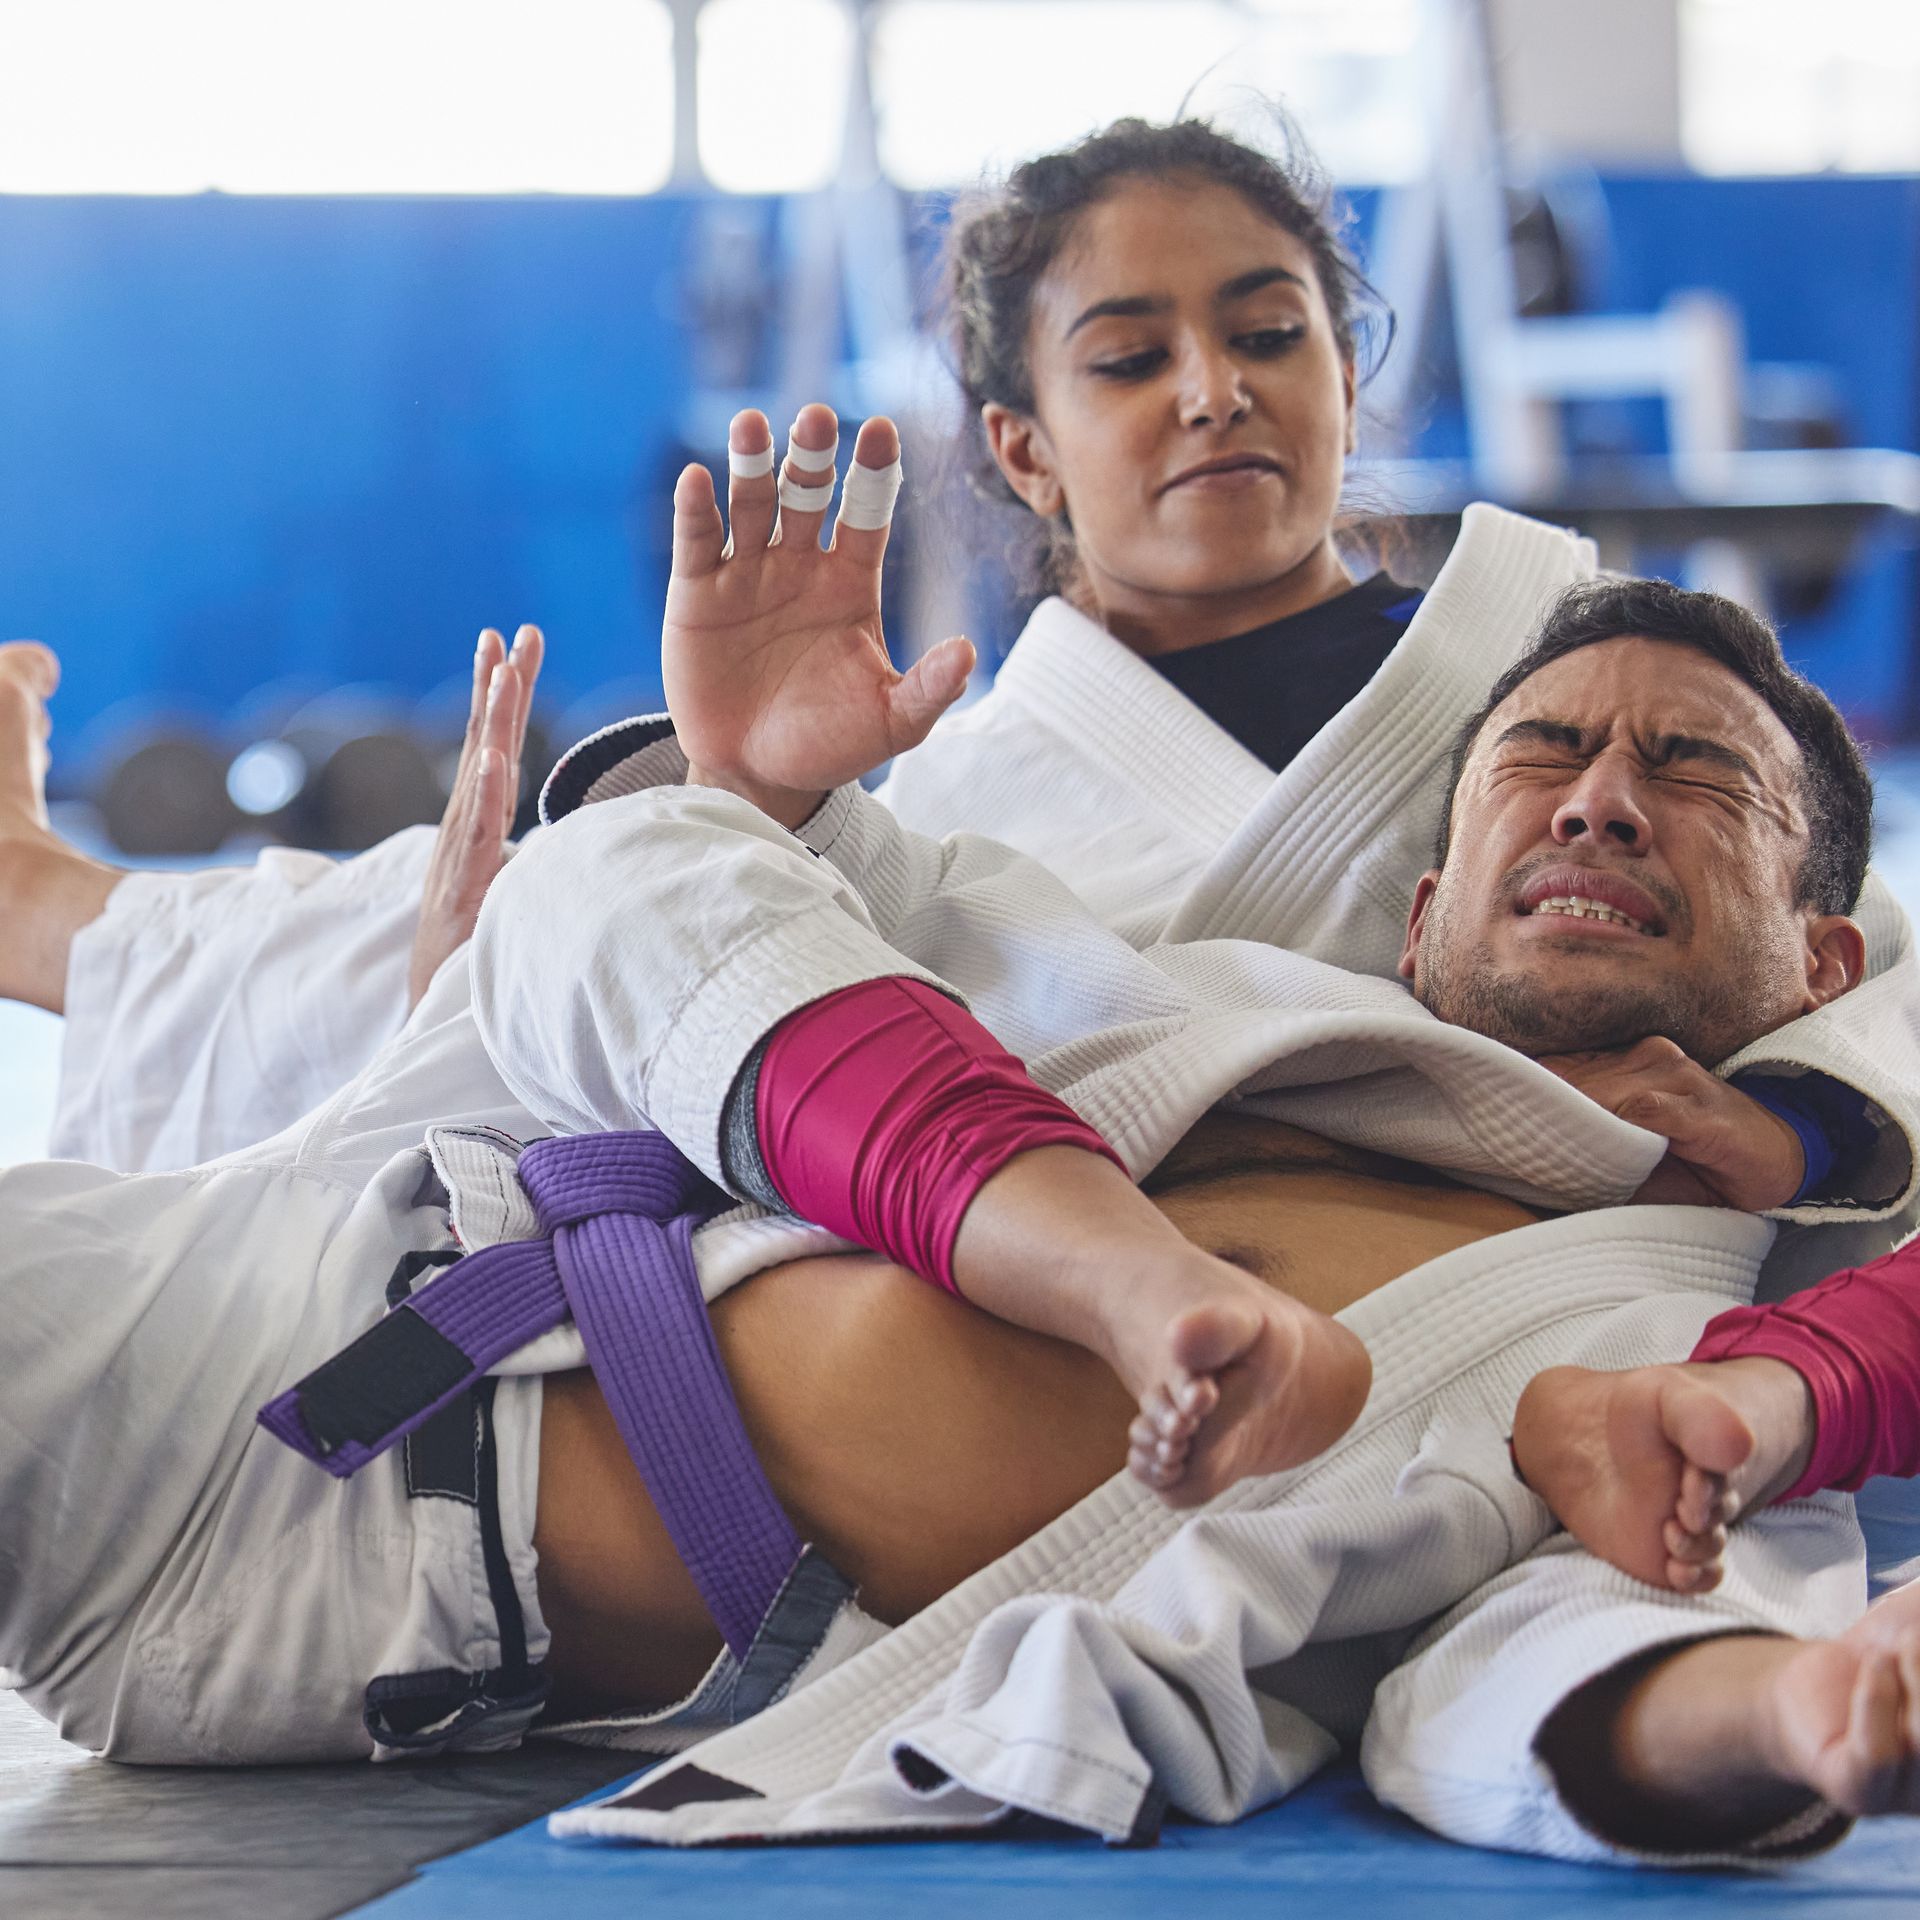 A man and a woman are wrestling in a gym.